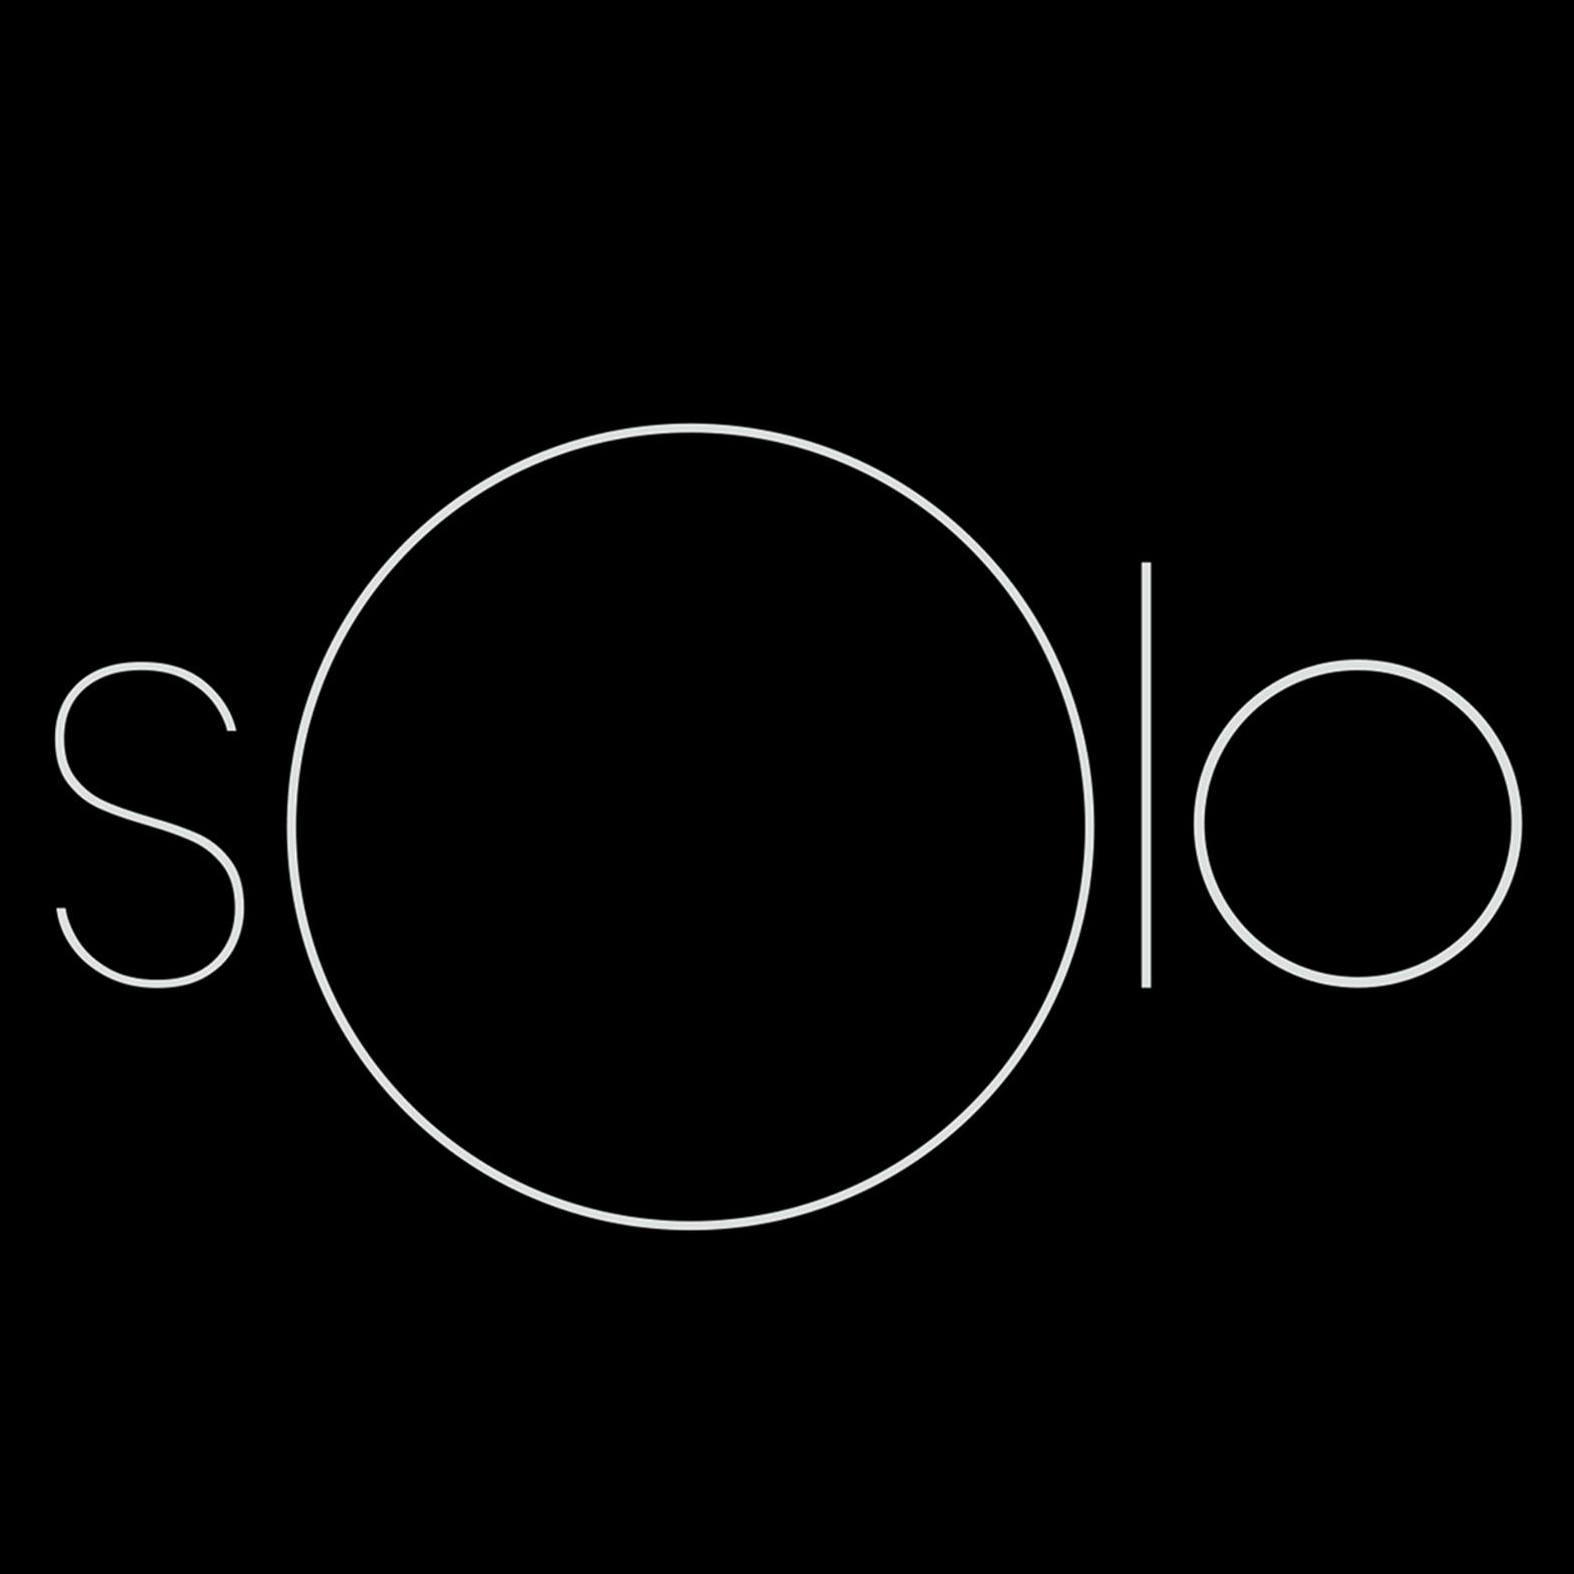 sOlo Architects|IT Services|Professional Services